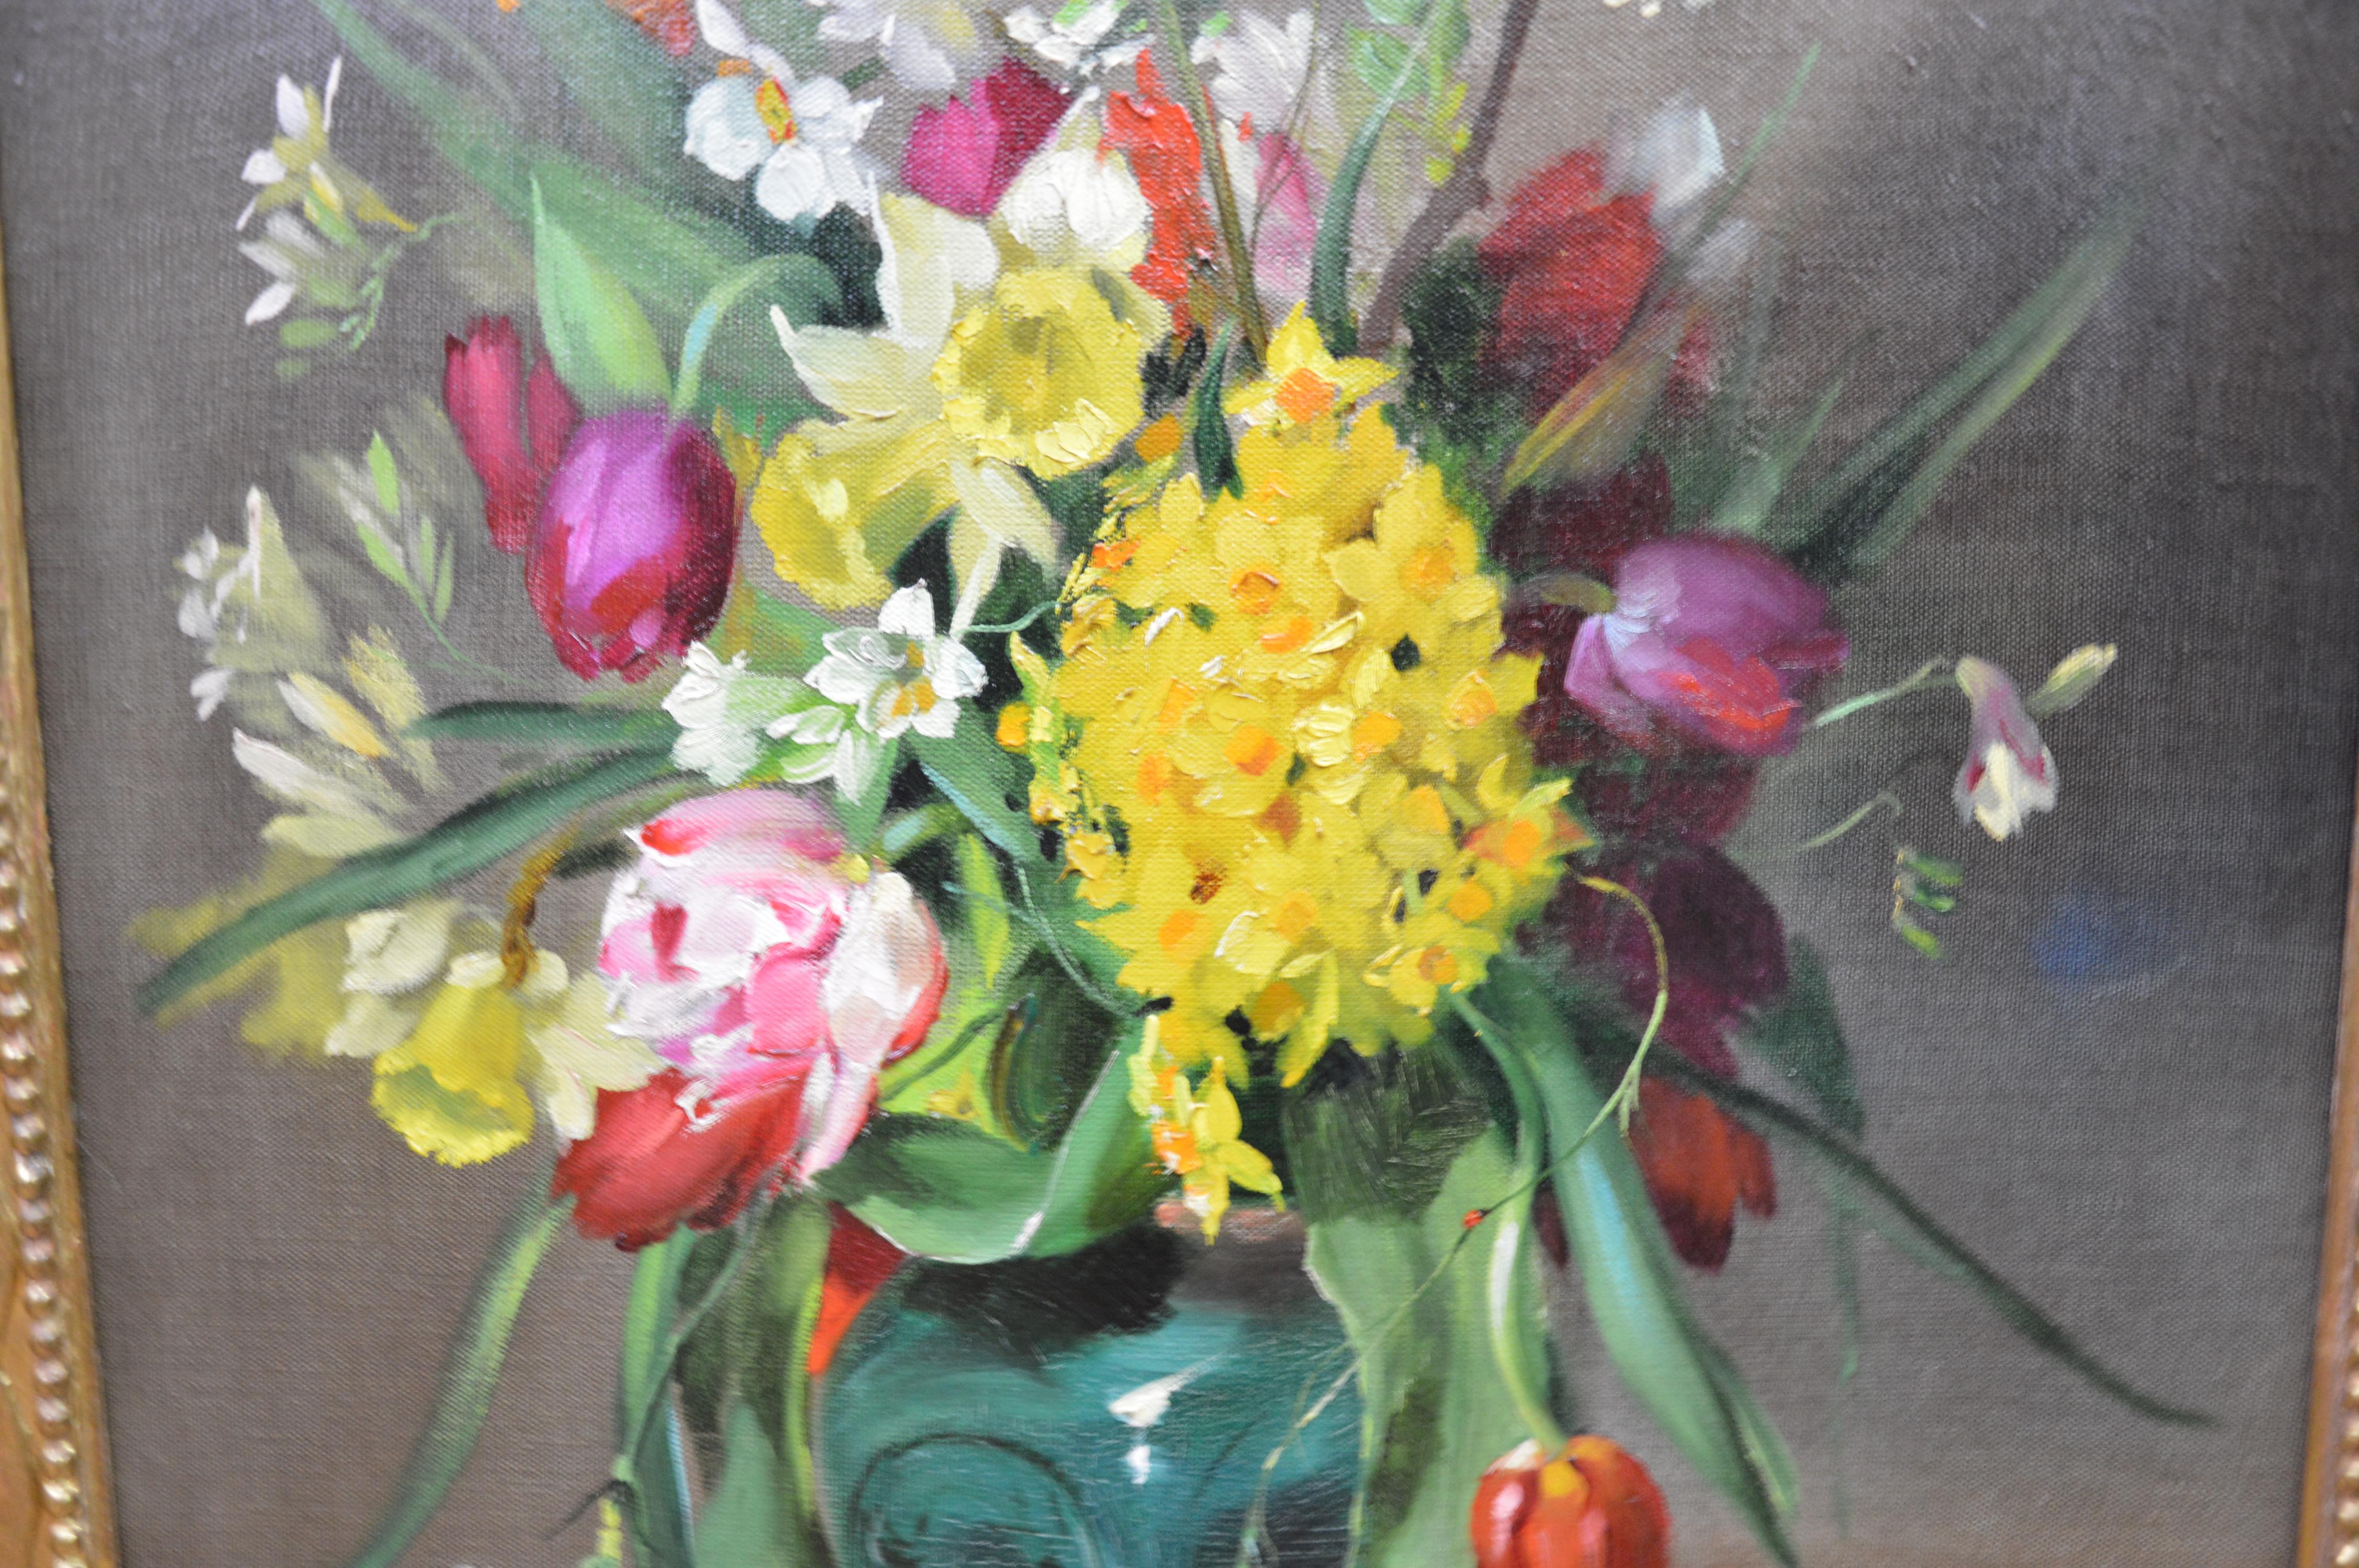 Tulips & Daffodils - Floral Still Life Oil Painting of Spring Flowers 3